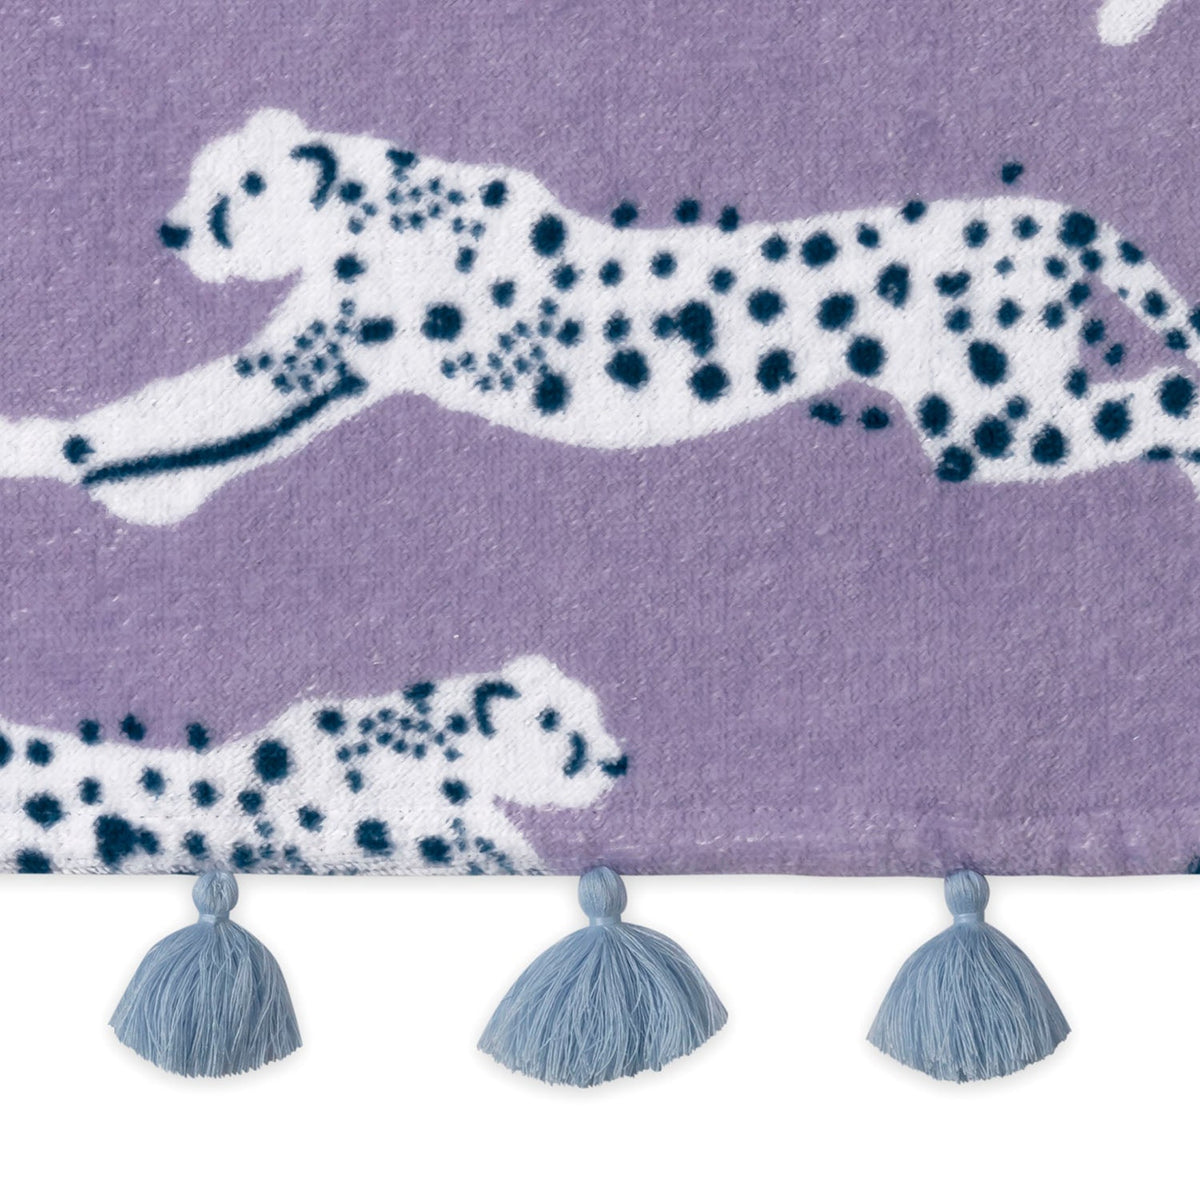 Swatch Sample of Matouk Leaping Leopard Beach Towels in Color Lilac